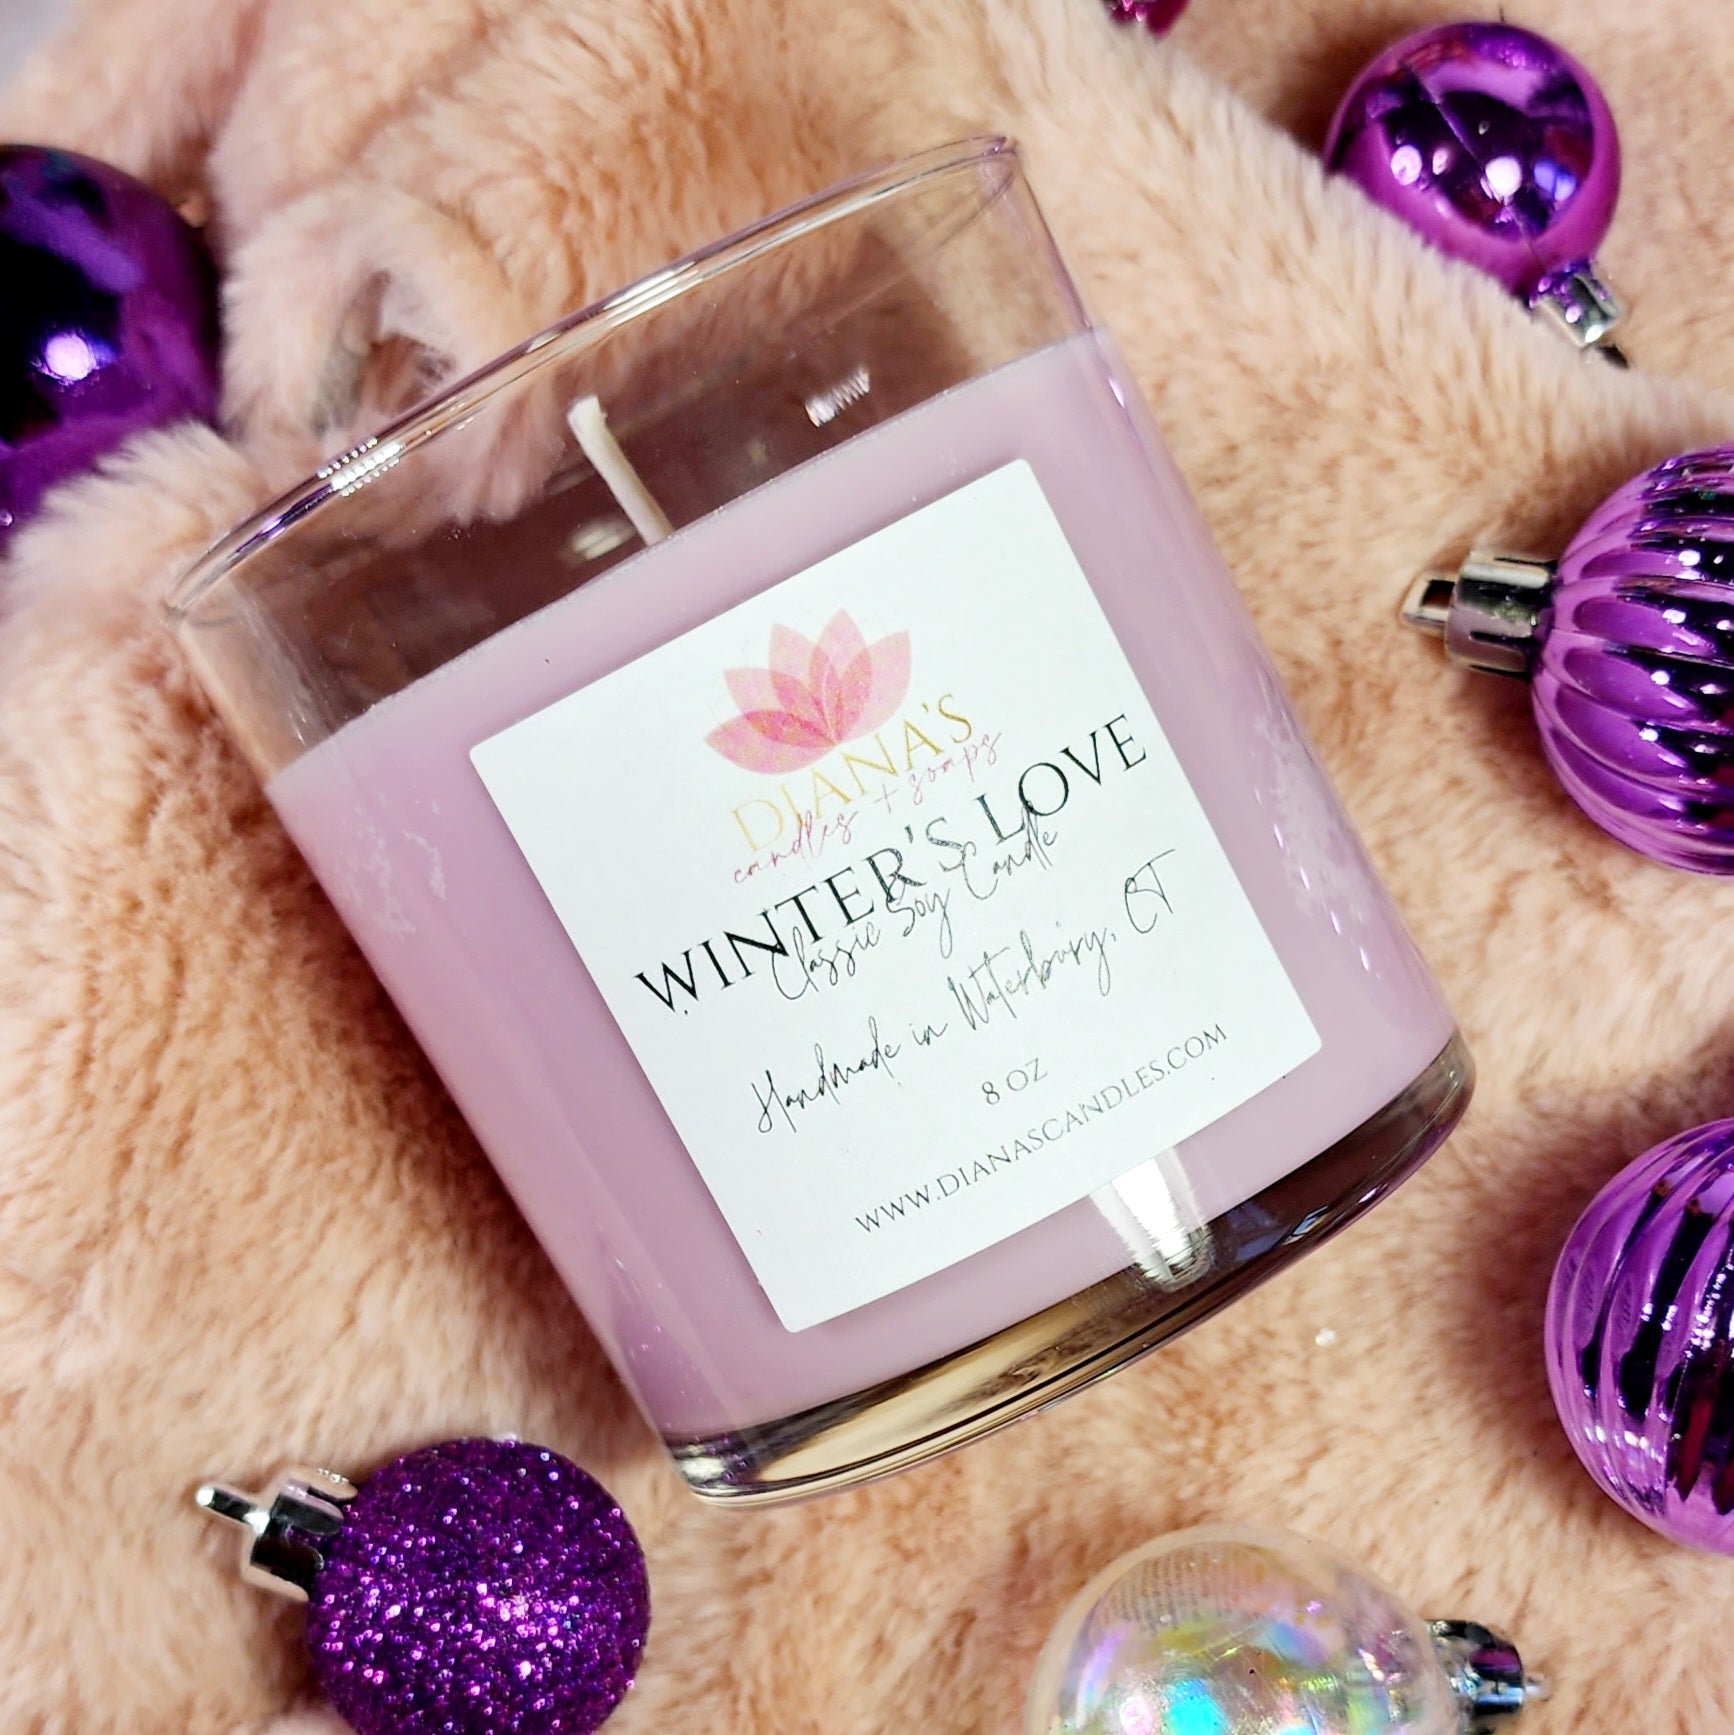 Winter's Love Candle Diana's Candles and Soaps 